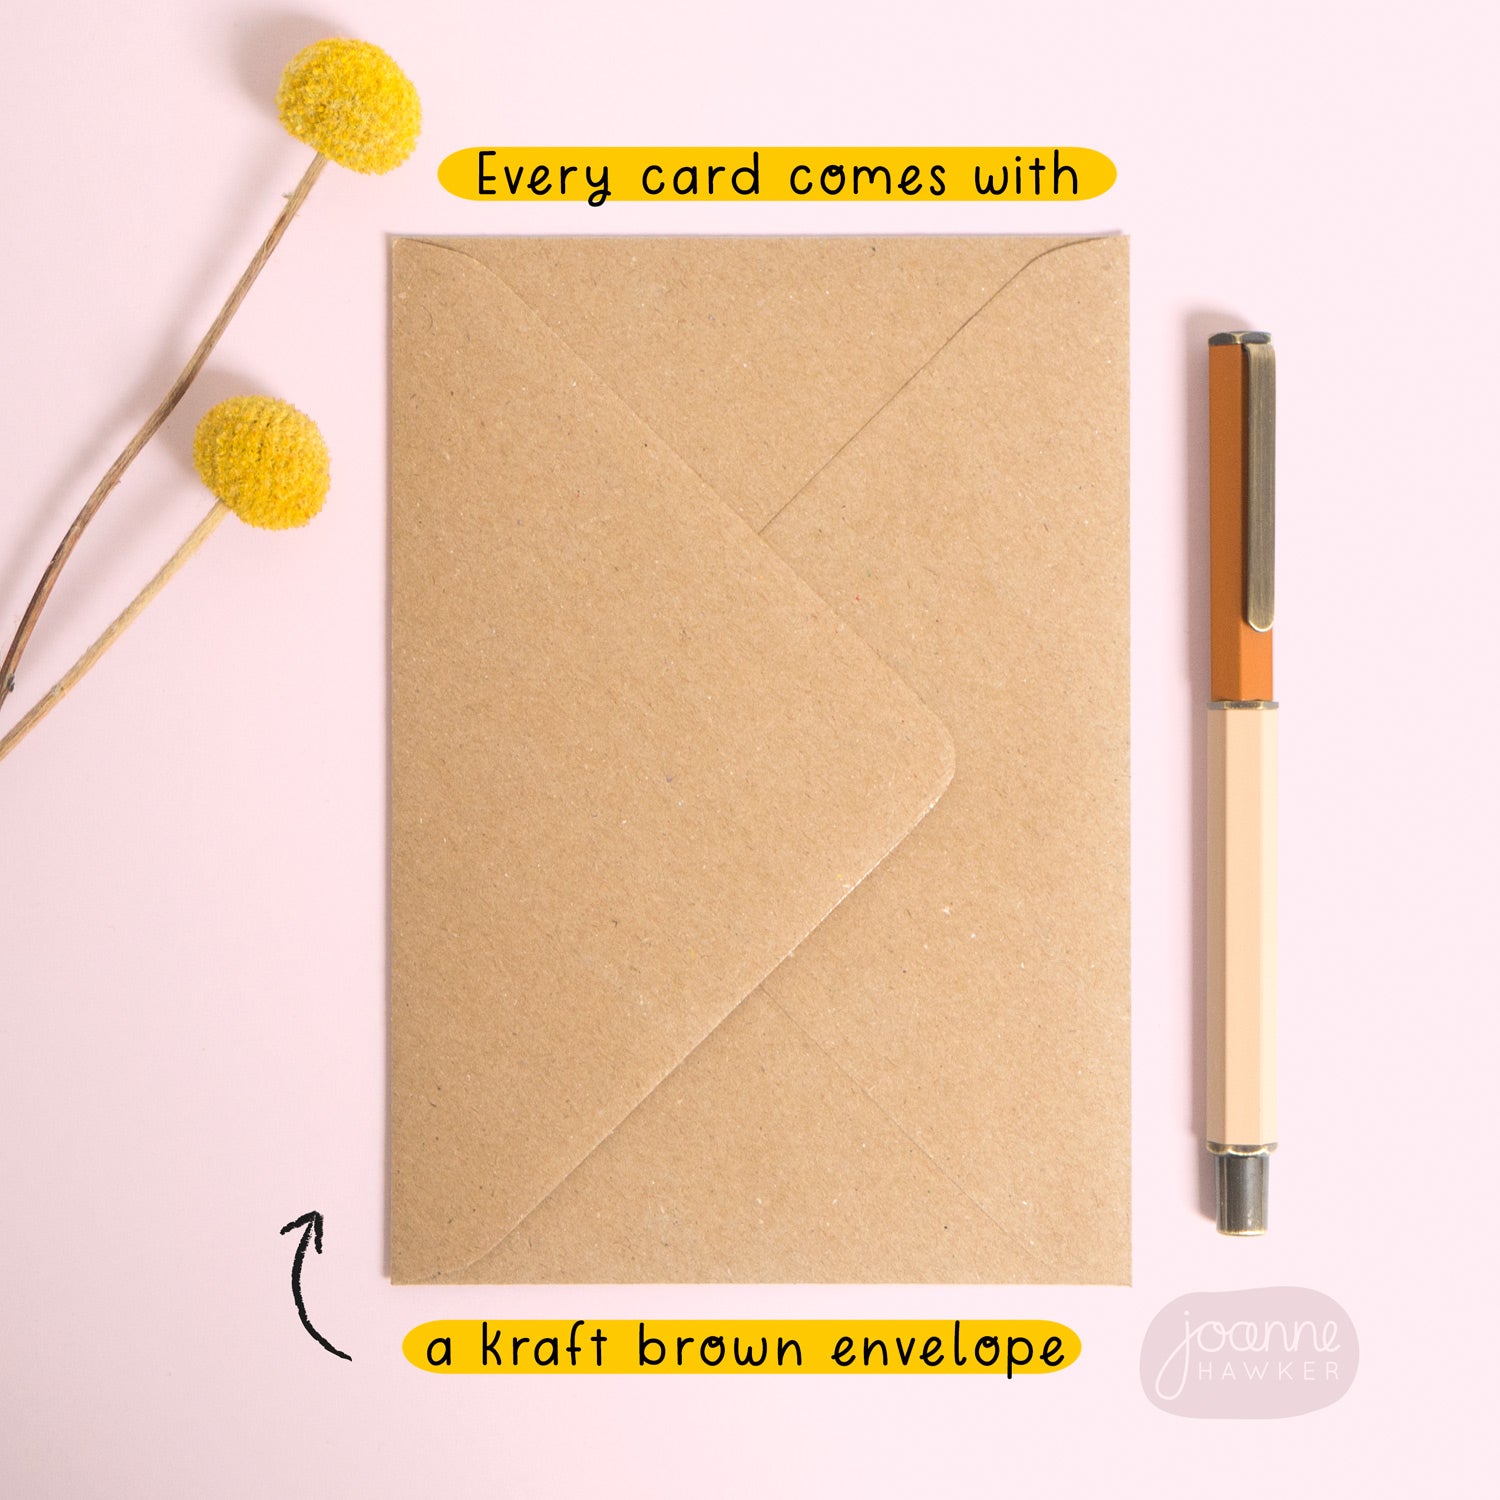 A kraft brown envelope set on a pink background with a pop of yellow flowers and a pen for scale. The text on the image states that each cards comes with a kraft brown envelope.